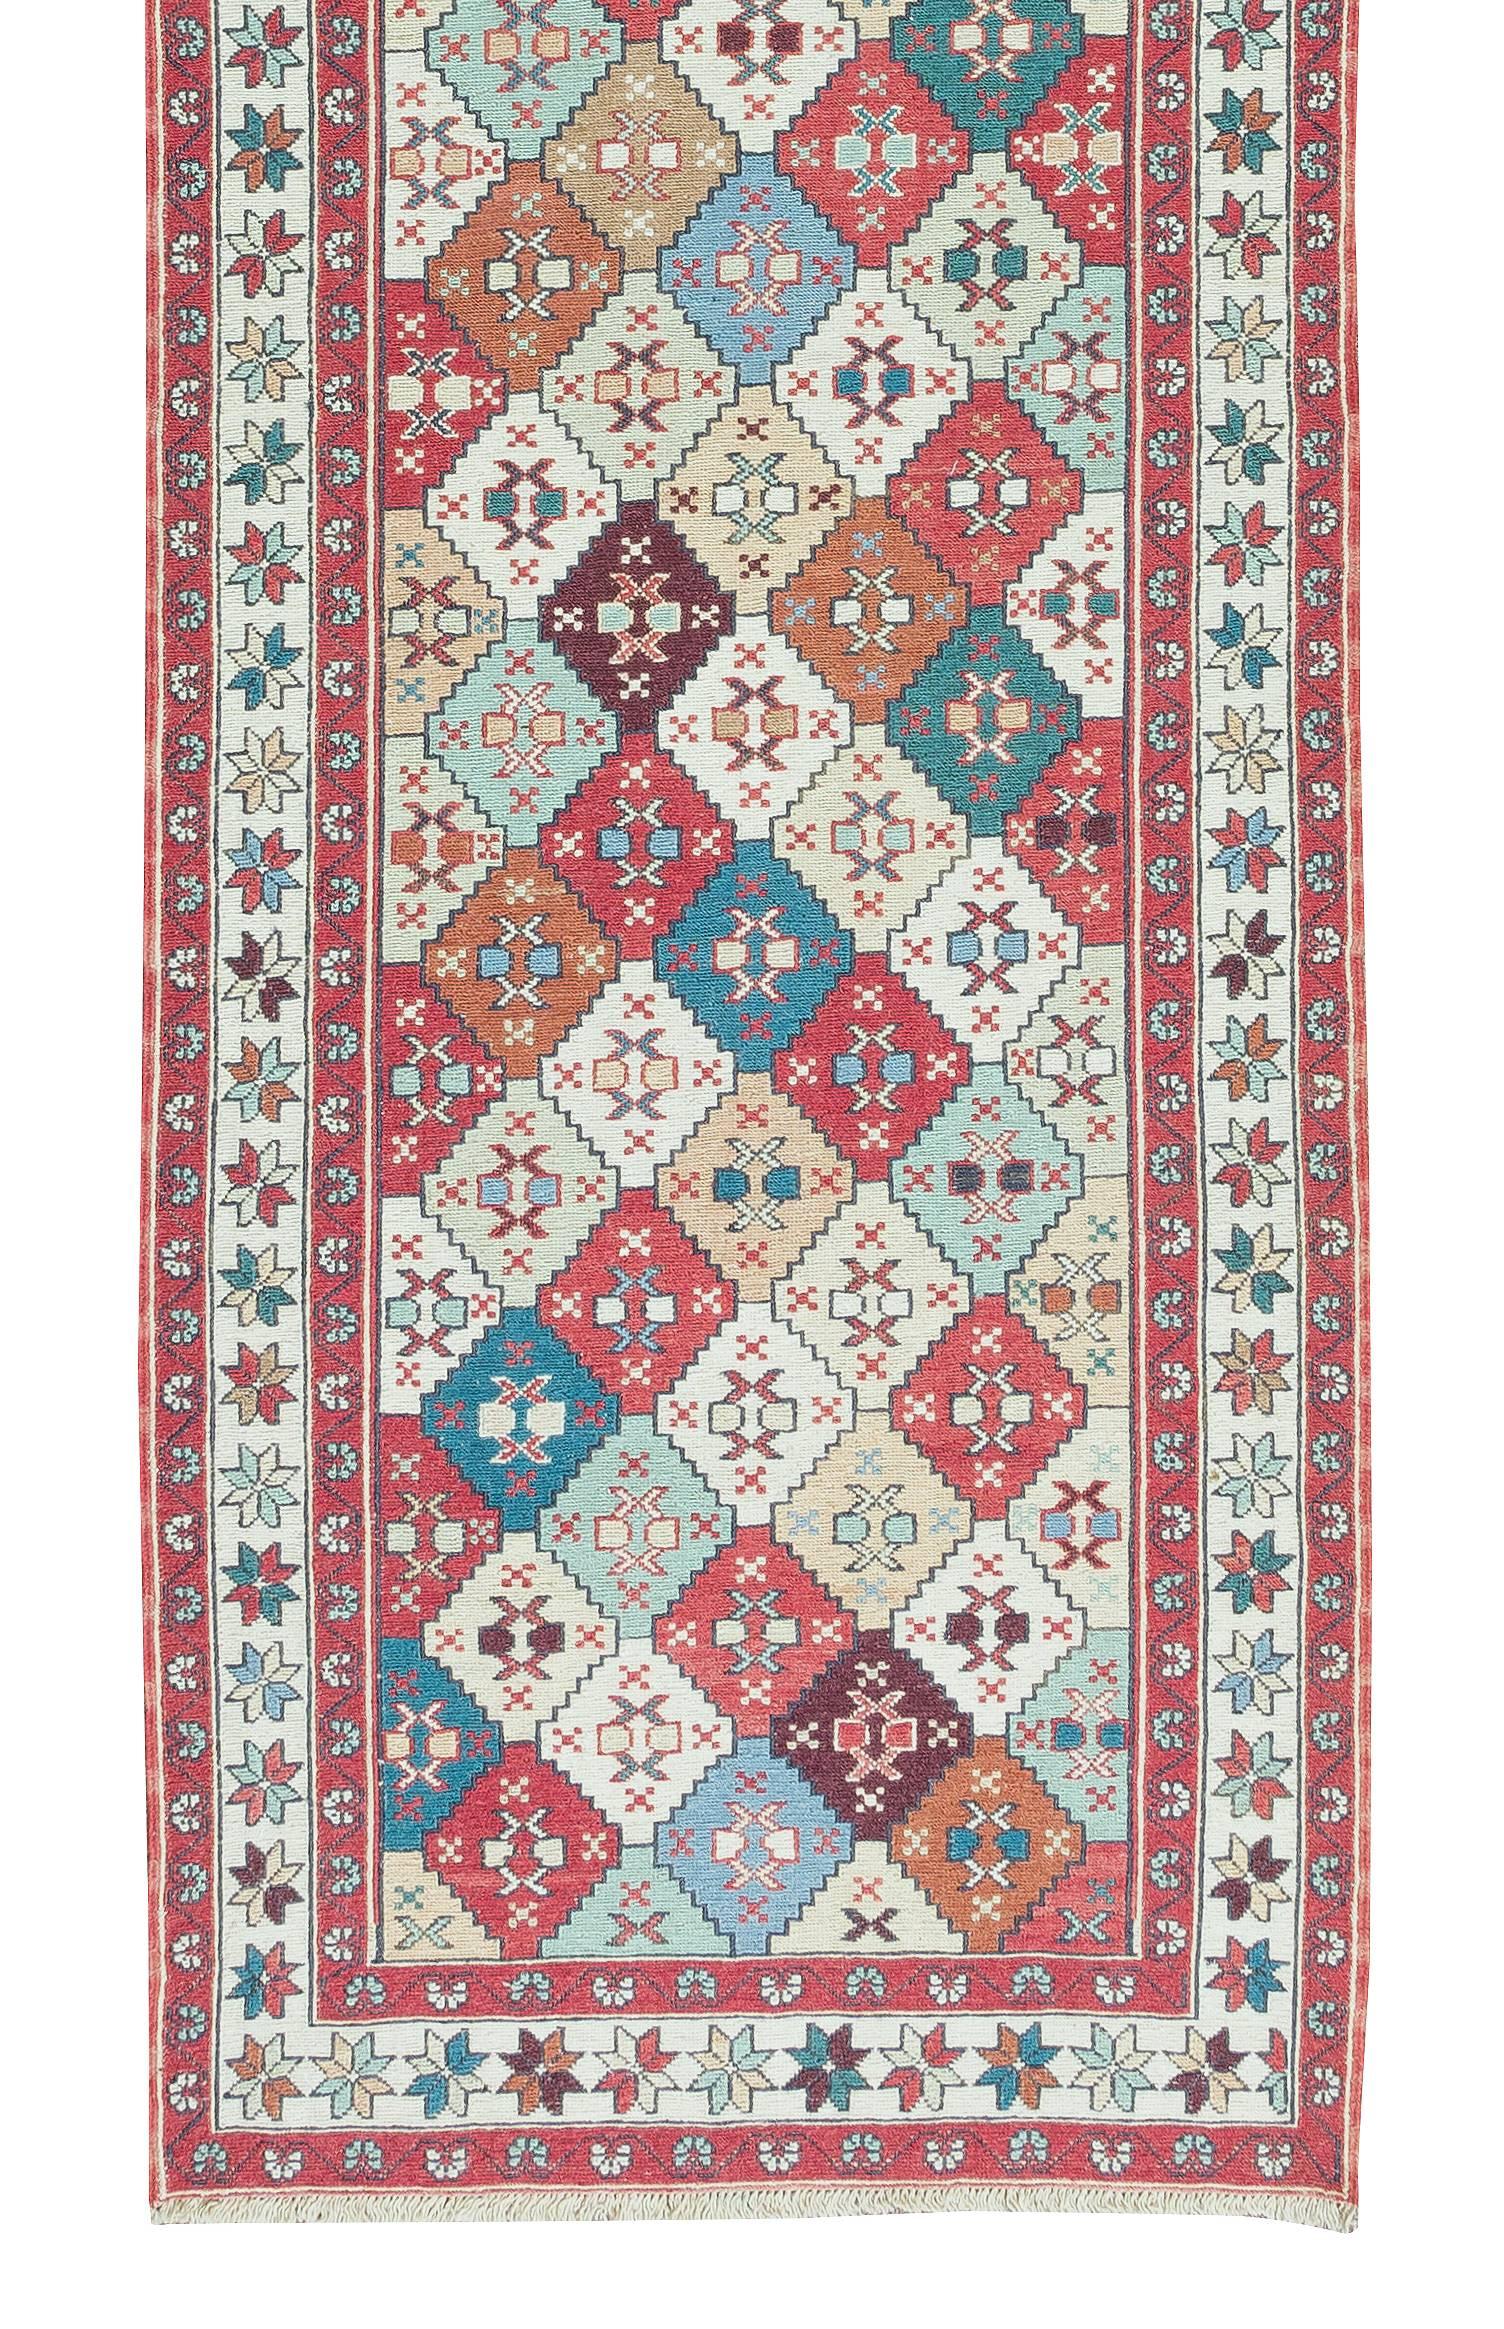 Hand-Knotted 2.6x9.3 Ft Hallway Runner Rug from Turkey, 20th Century Handmade Corridor Carpet For Sale